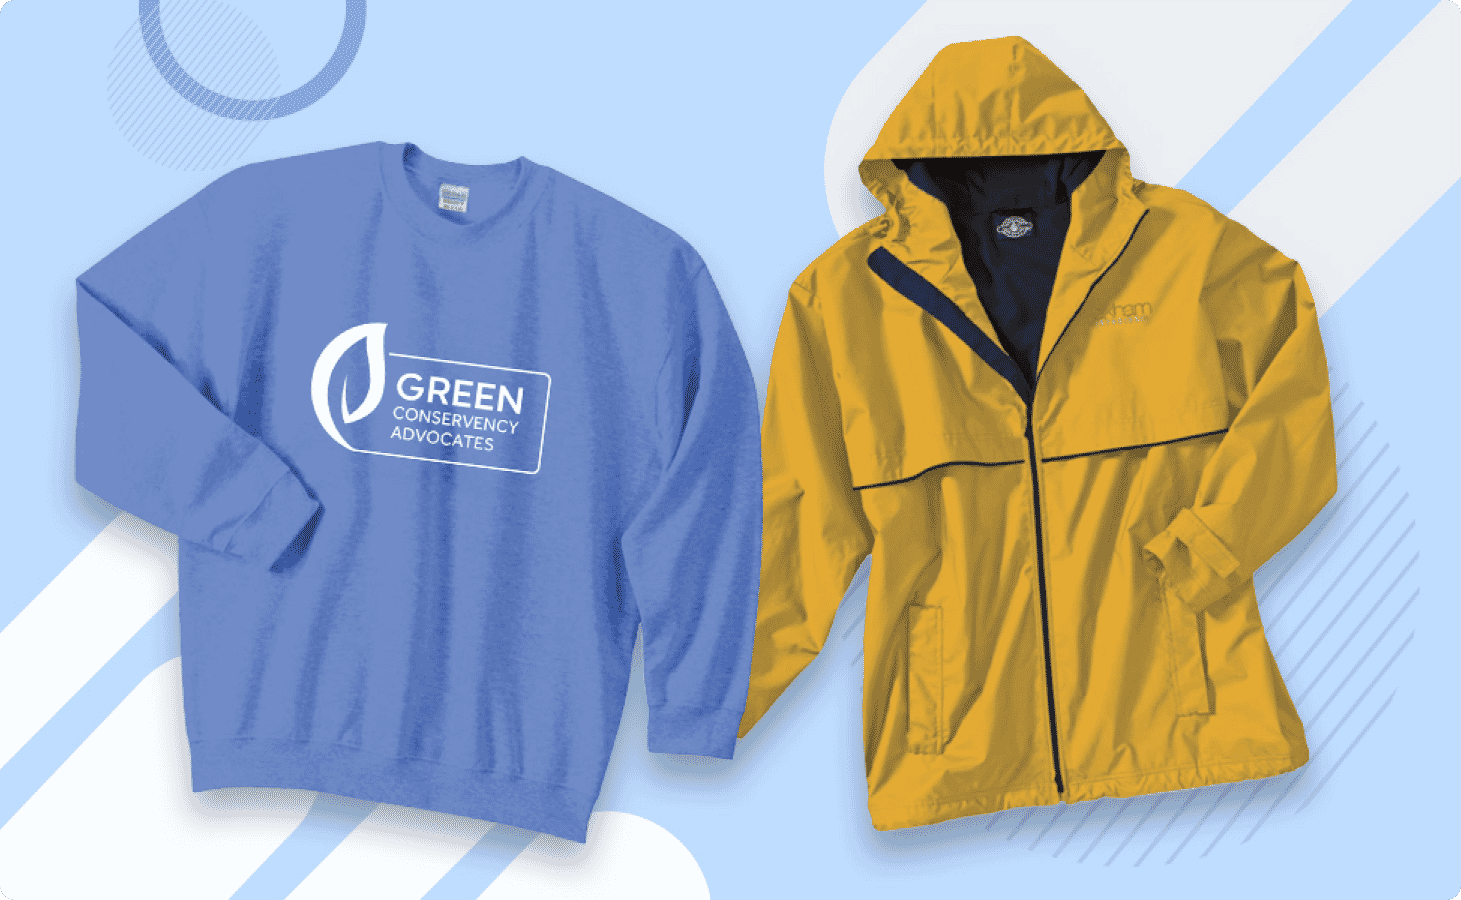 3. Give your Fundraiser Guests a Warm Reception with a Jacket or Sweatshirt